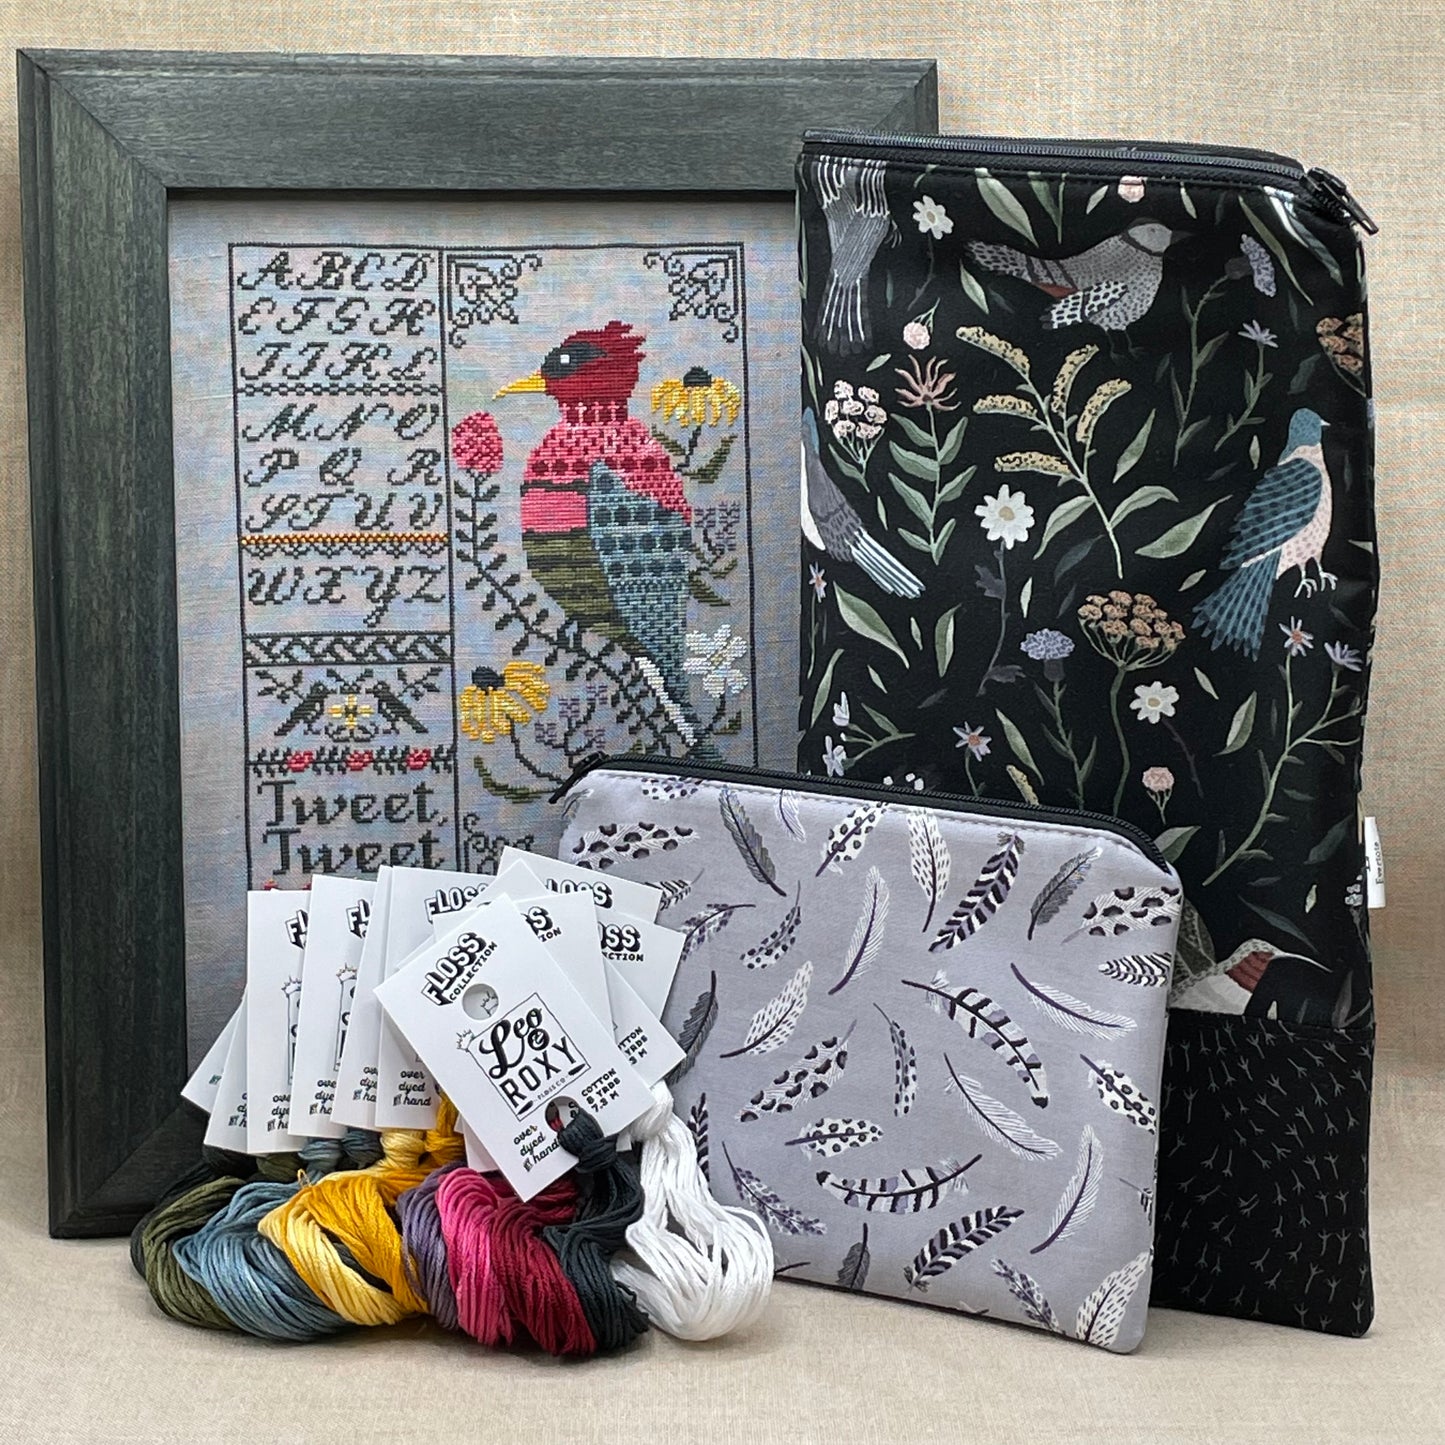 Quaint Rose Needlearts, Roxy Floss Co, and Evertote: Tweet Tweet Full Kit - with Black Project Bag Set, Booklet Chart, and Roxy Floss